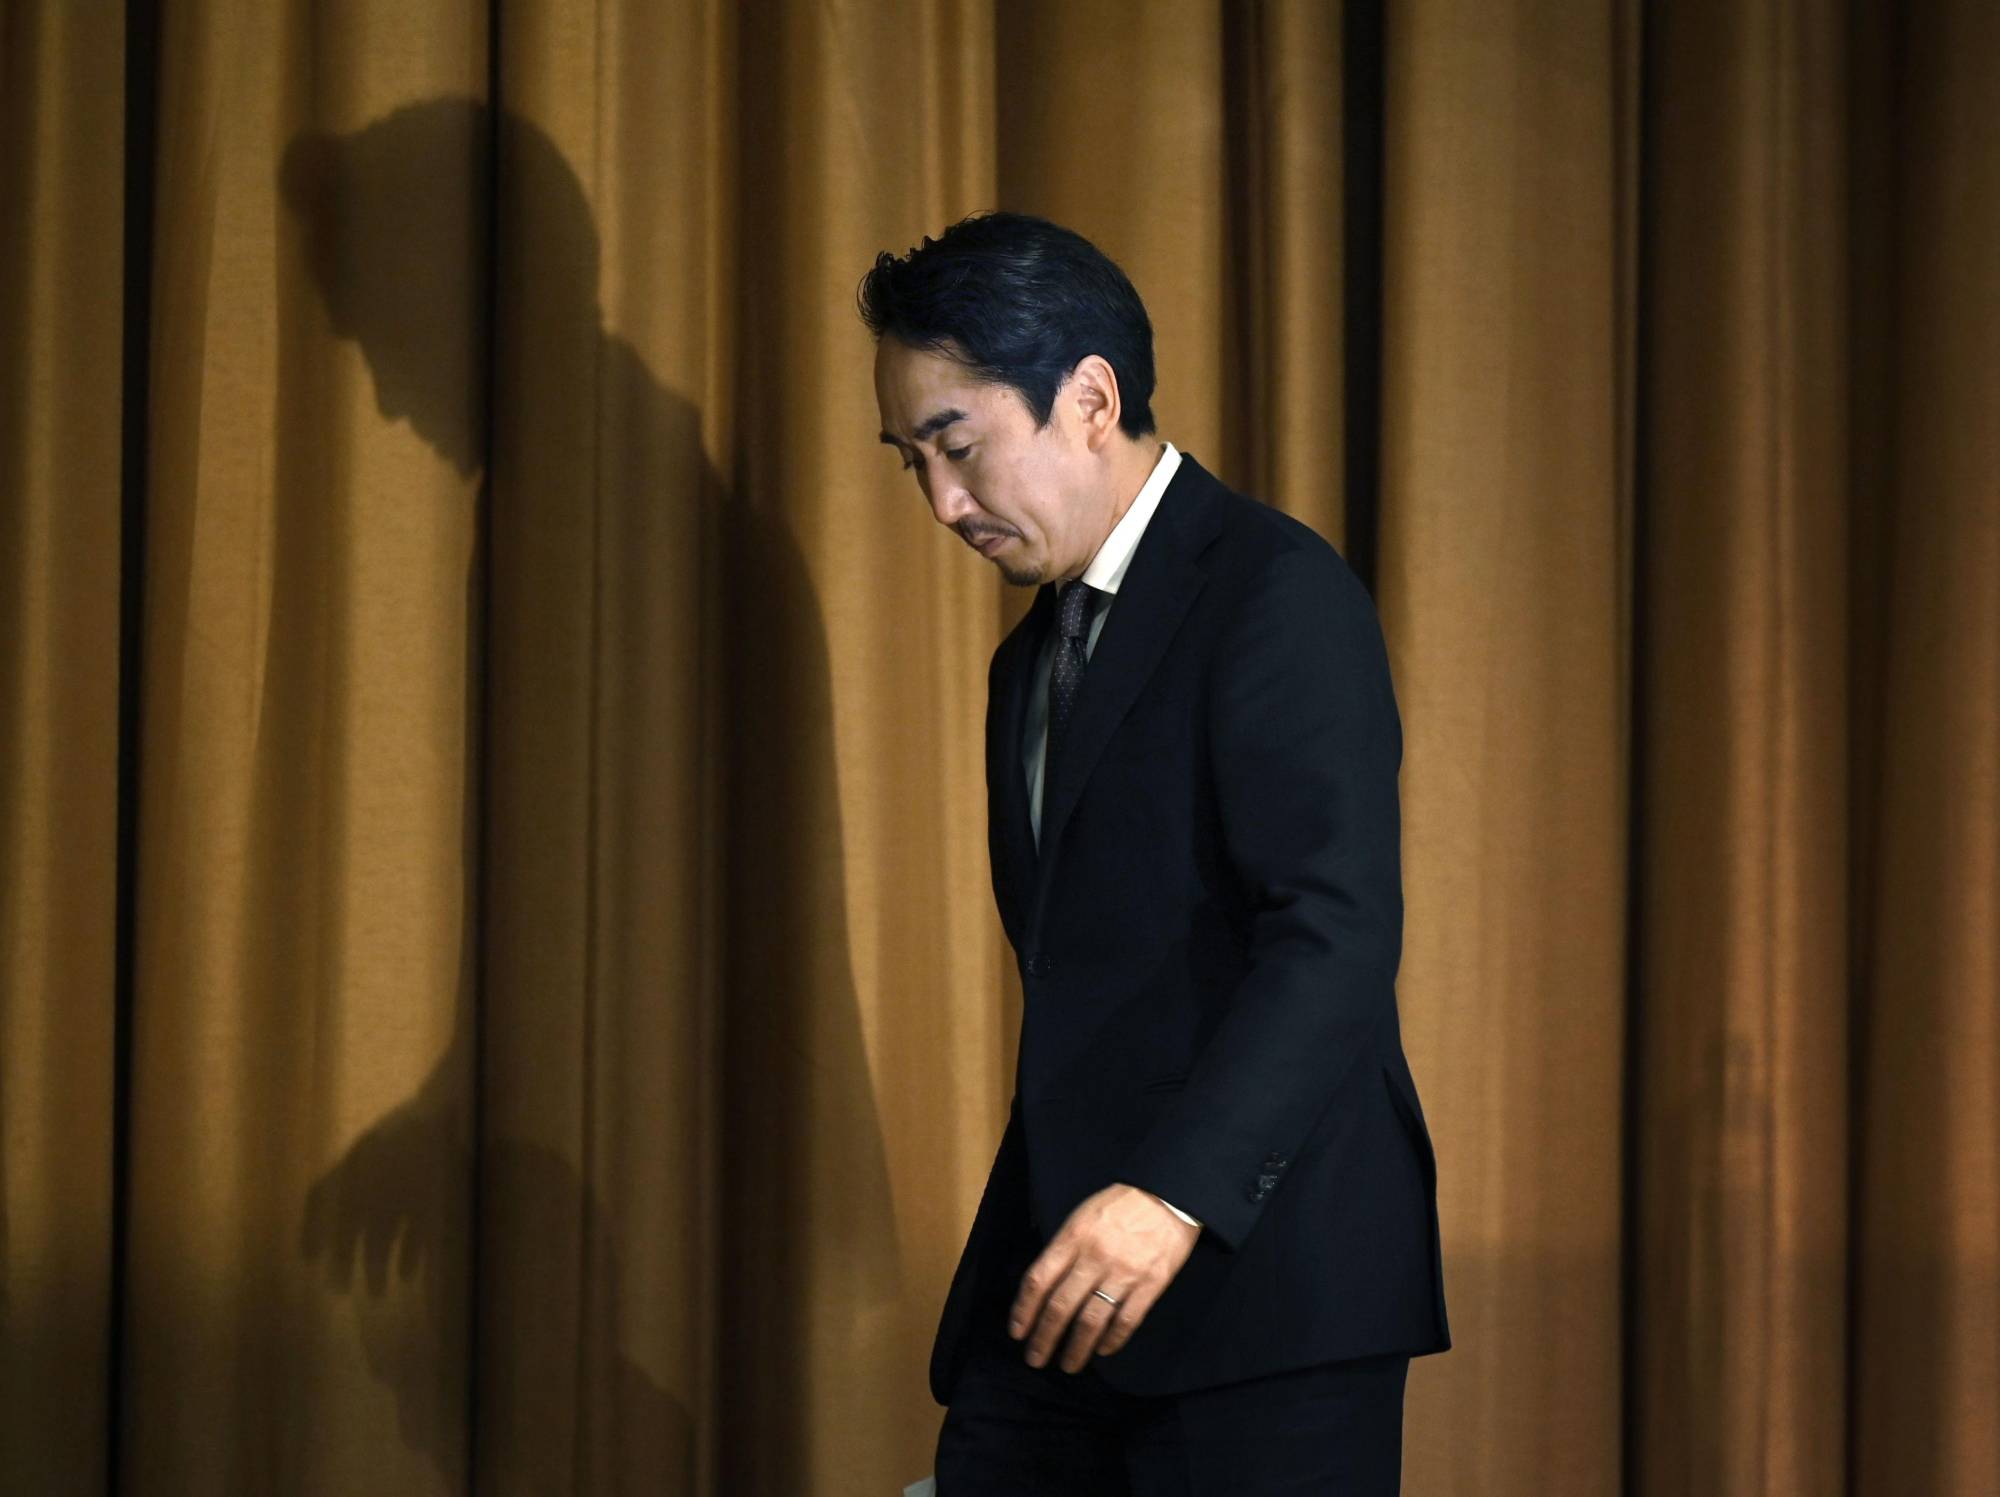 Line Corp. CEO Takeshi Idezawa leaves a news conference on Tuesday in Tokyo. The messaging app operator said it had blocked access to private information from its Chinese affiliate. | KYODO